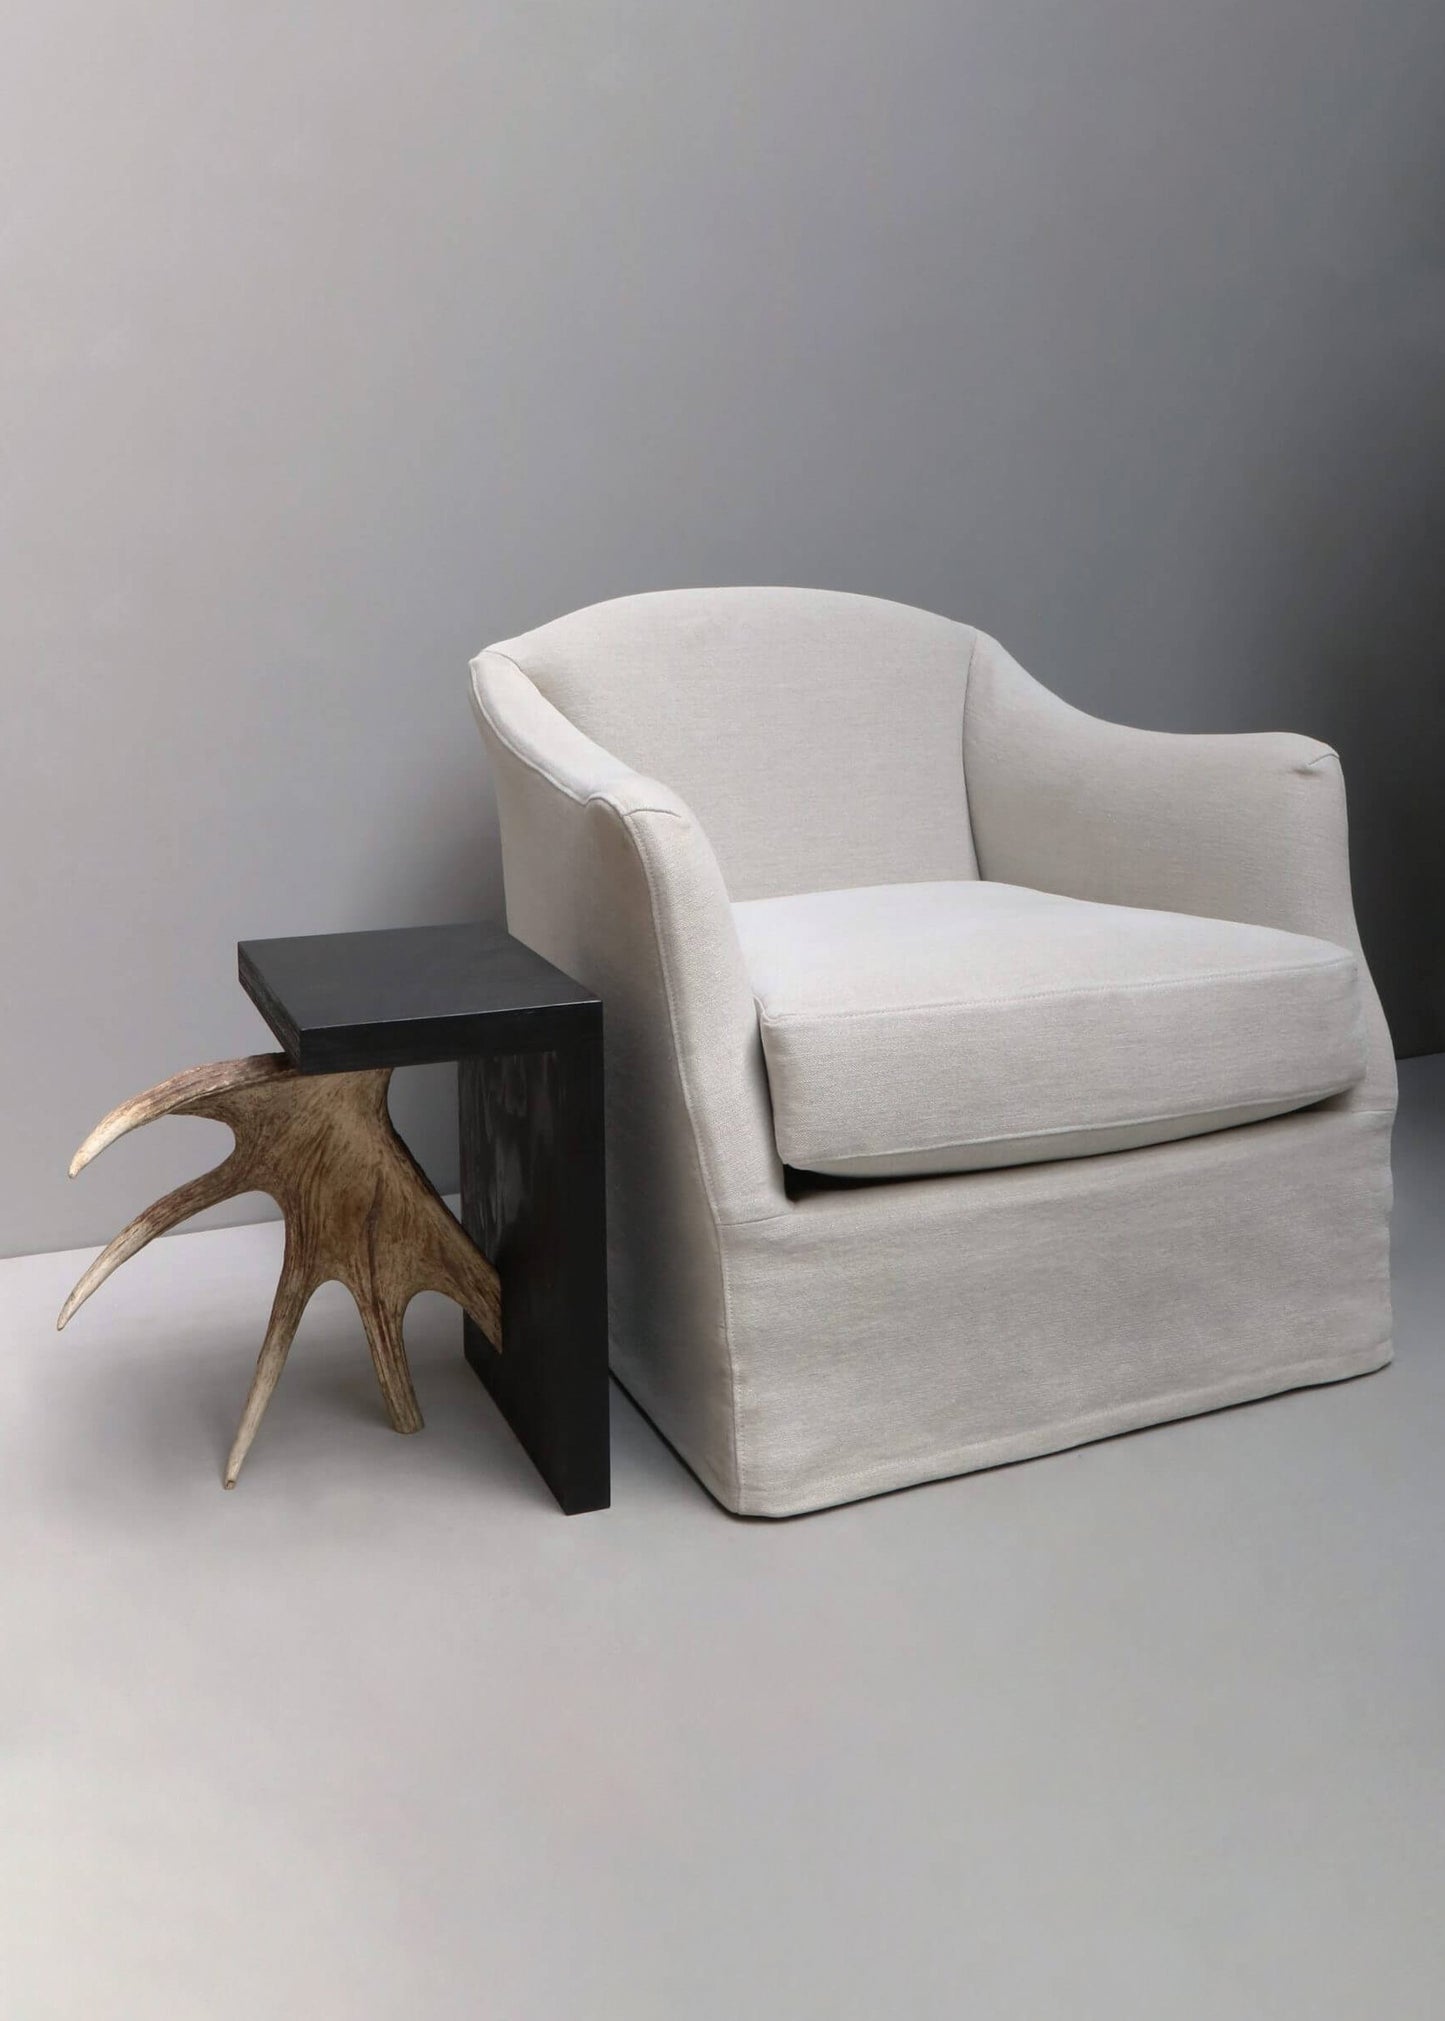 Stag T Side Table in Black by Rick Owens